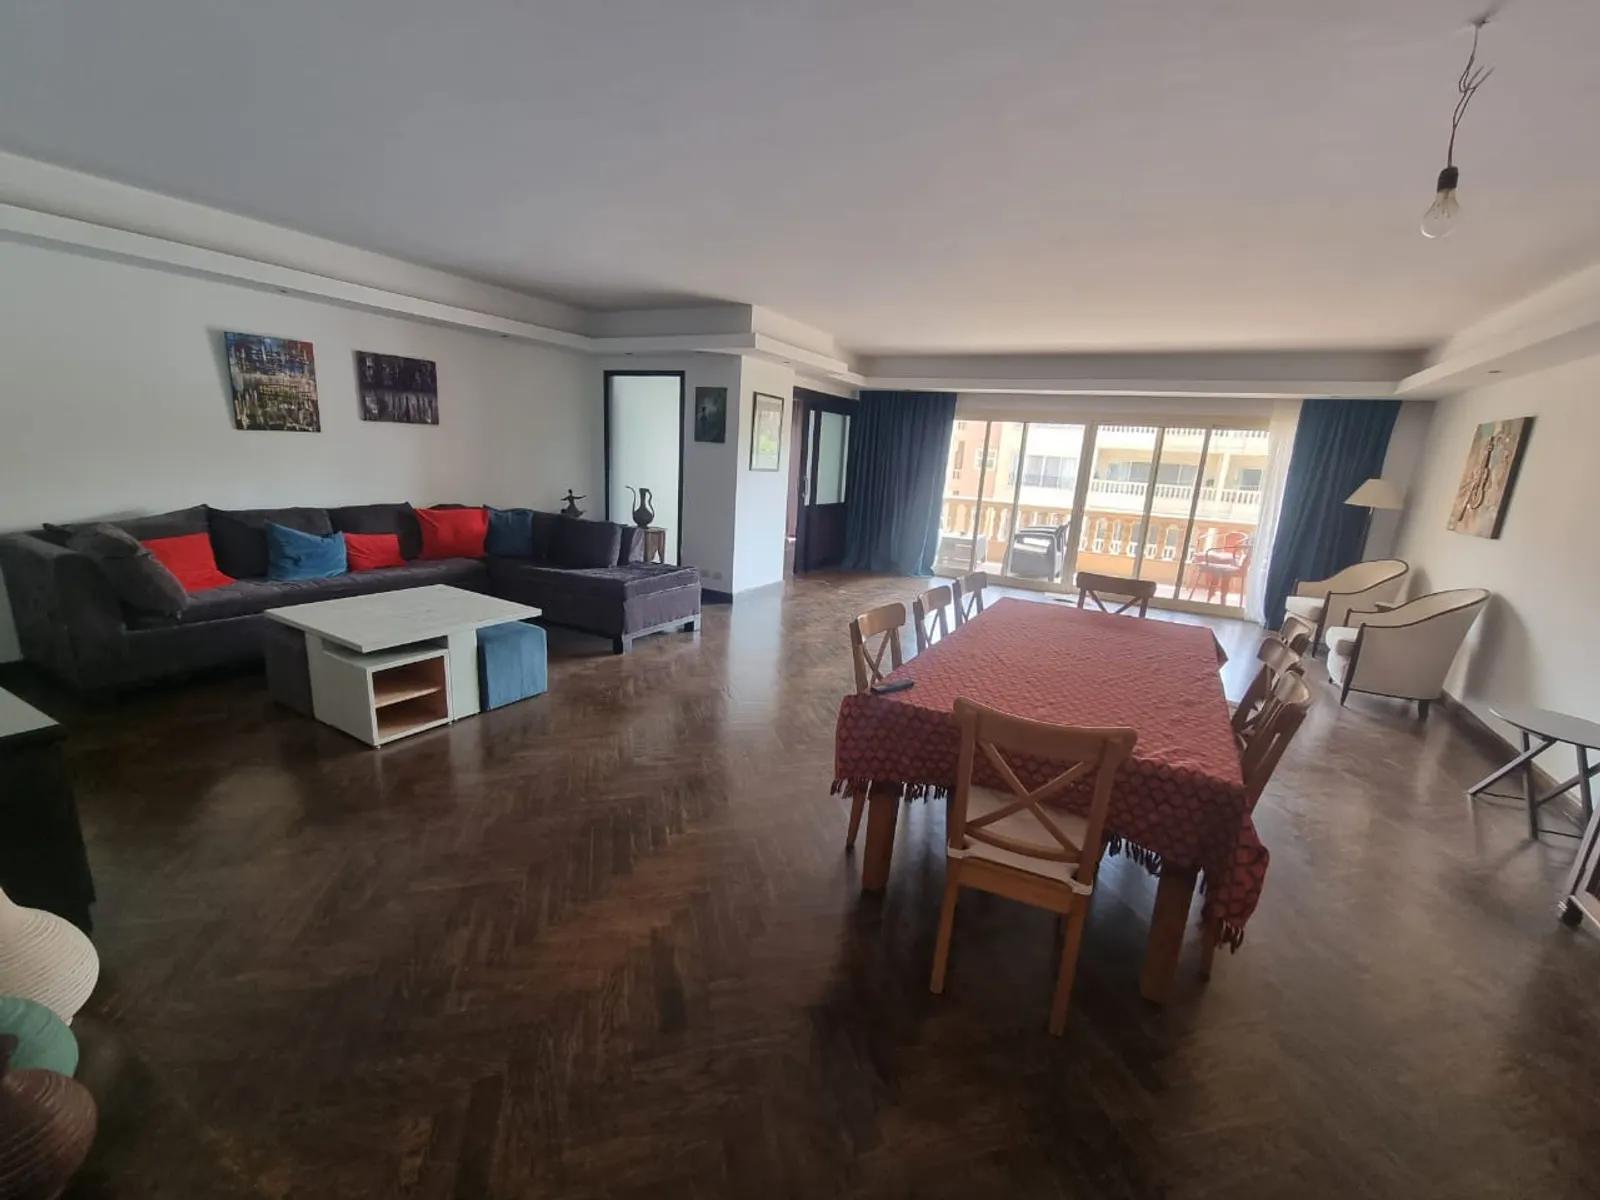 RECEPTION  @ Apartments For Rent In Maadi Maadi Sarayat Area: 330 m² consists of 3 Bedrooms 4 Bathrooms Modern furnished 5 stars #5384-0